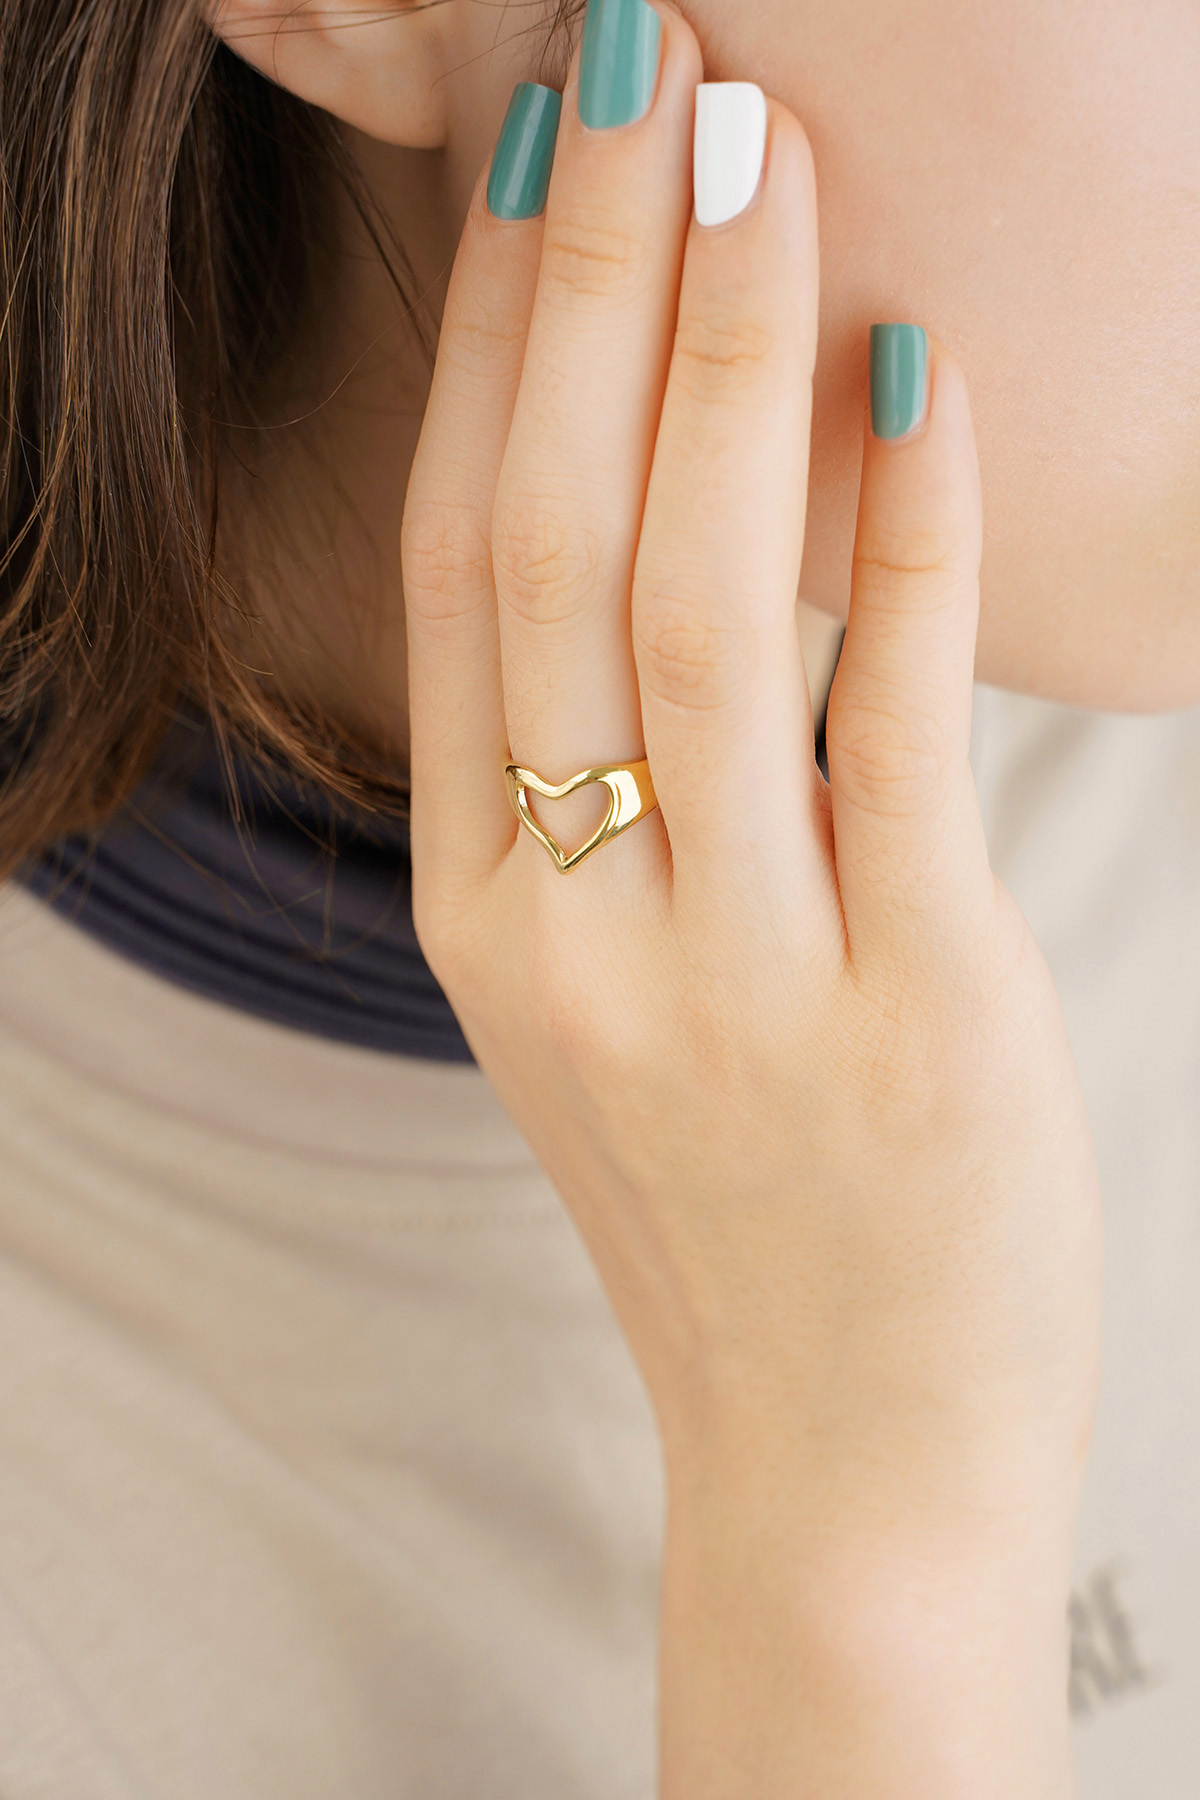 Ring love hands - gold h5 Picture2